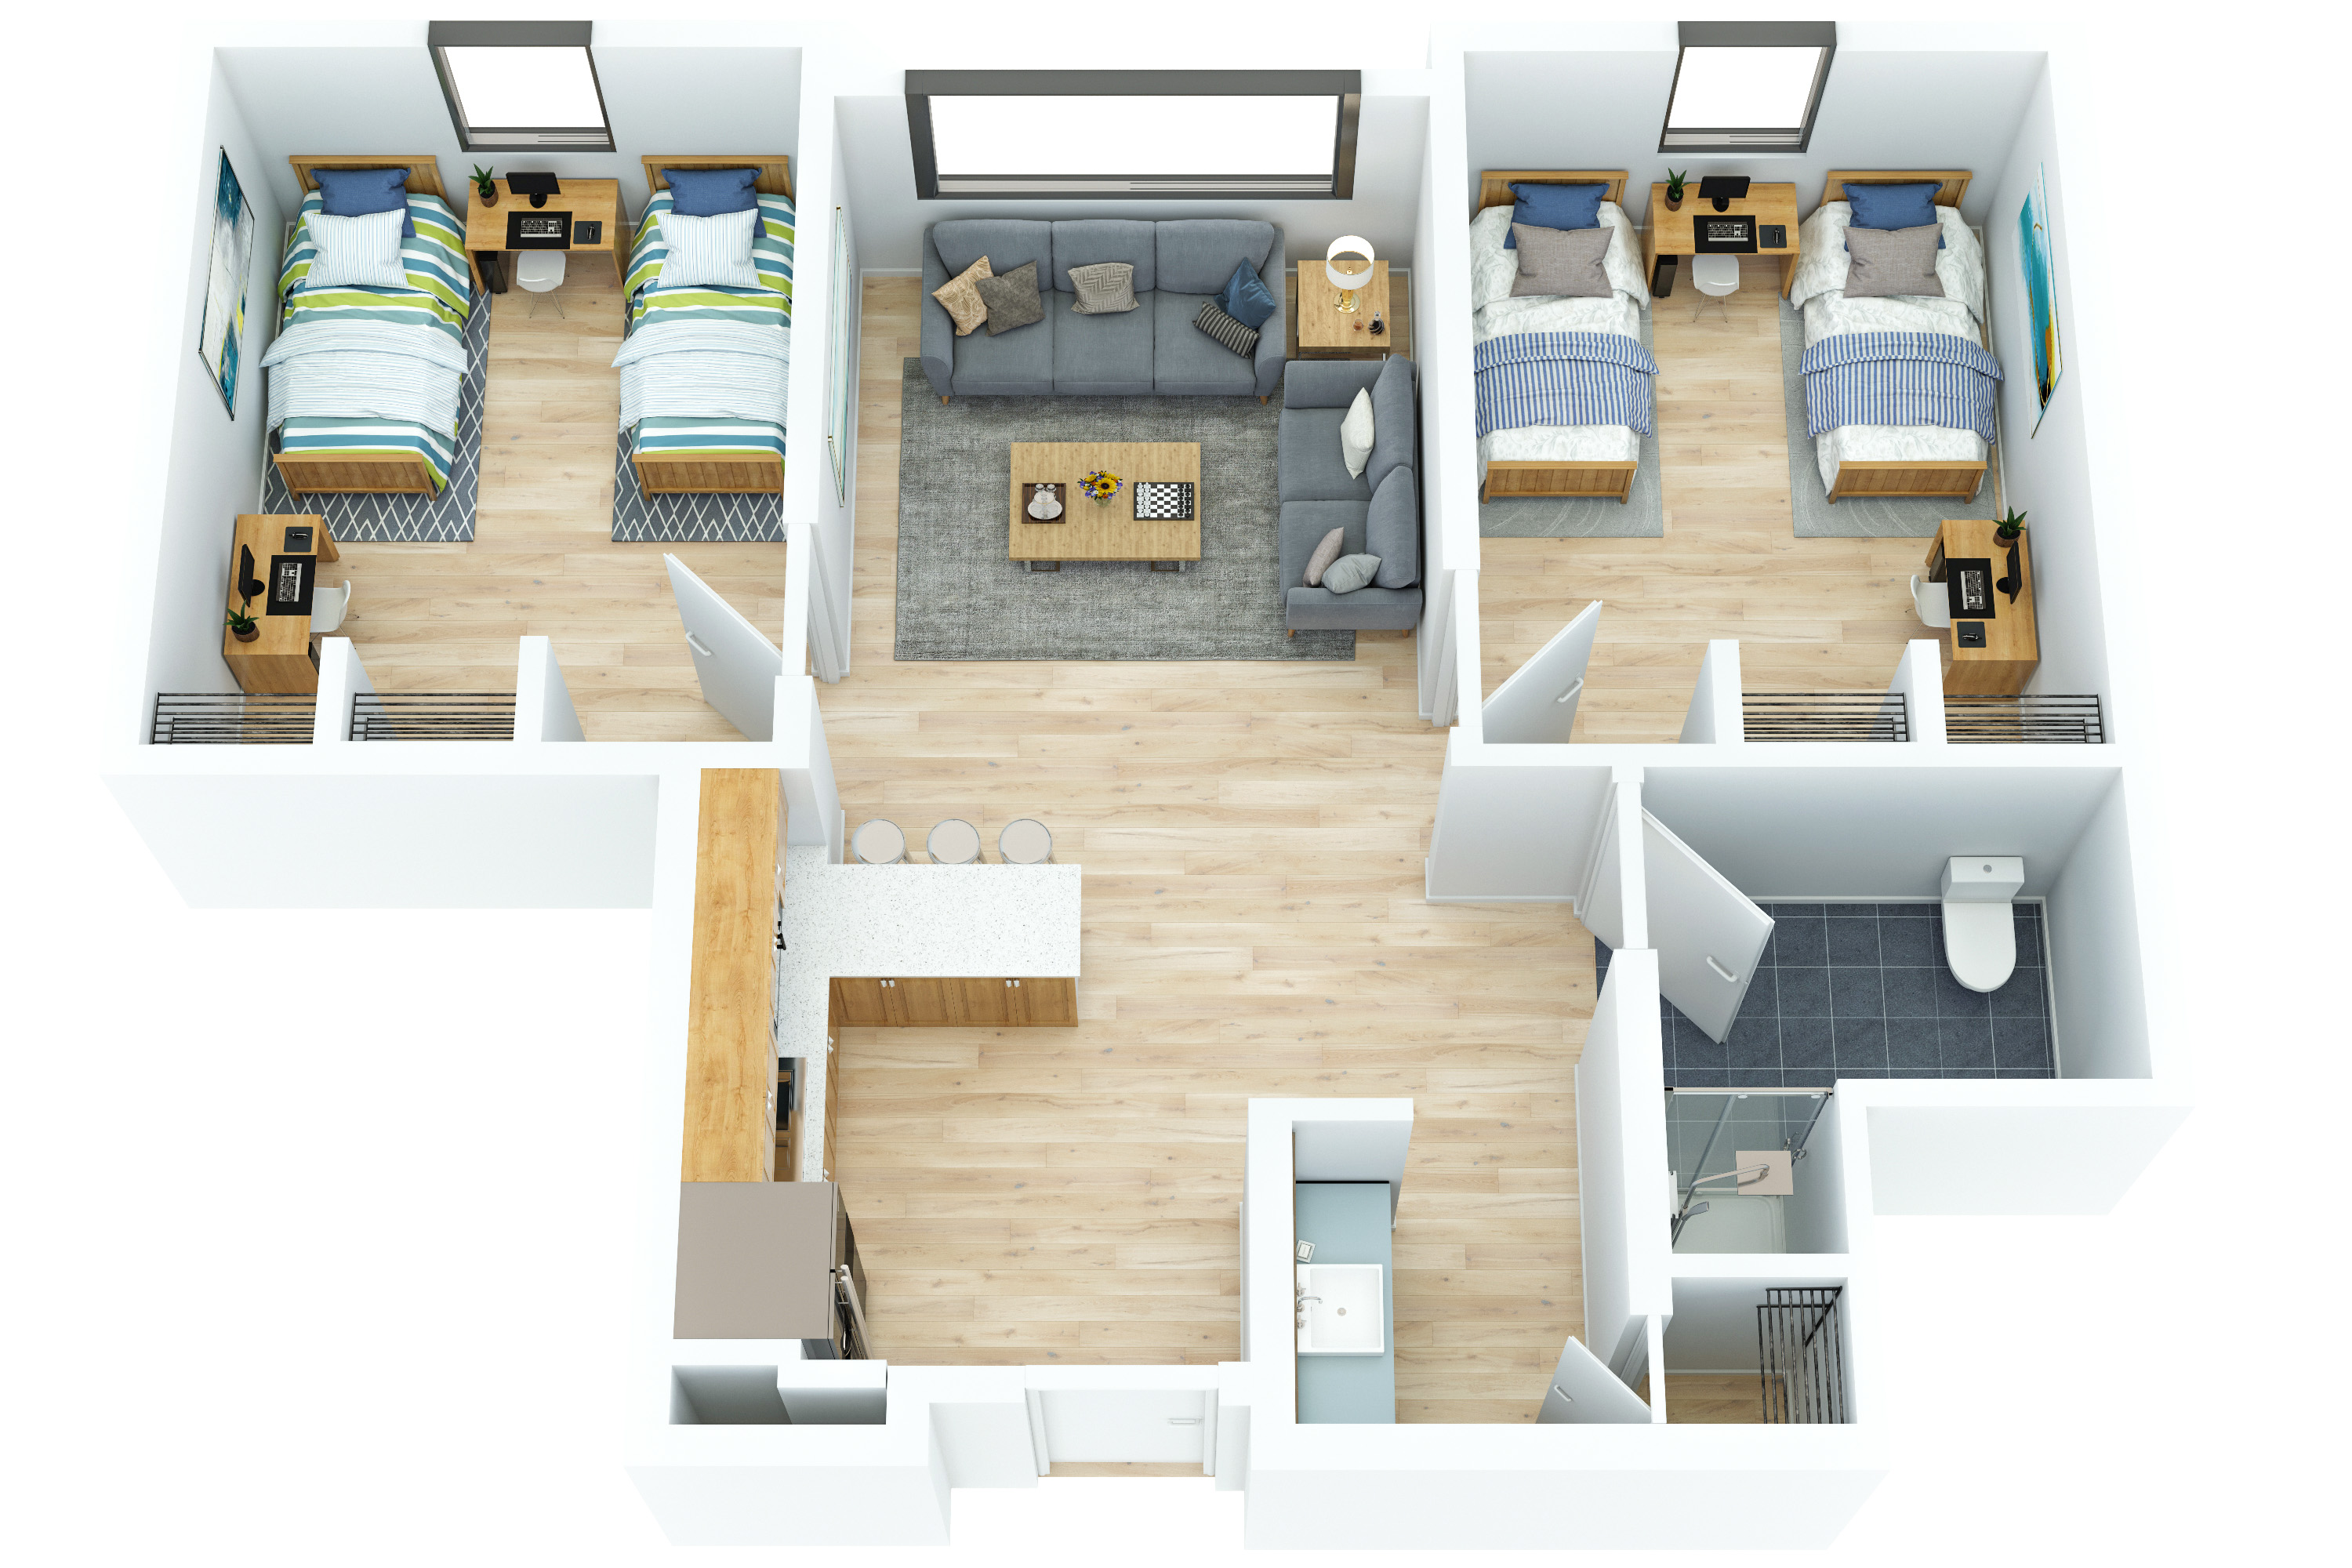 Floorplan of 4 bedroom apartment composed of 2 shared rooms